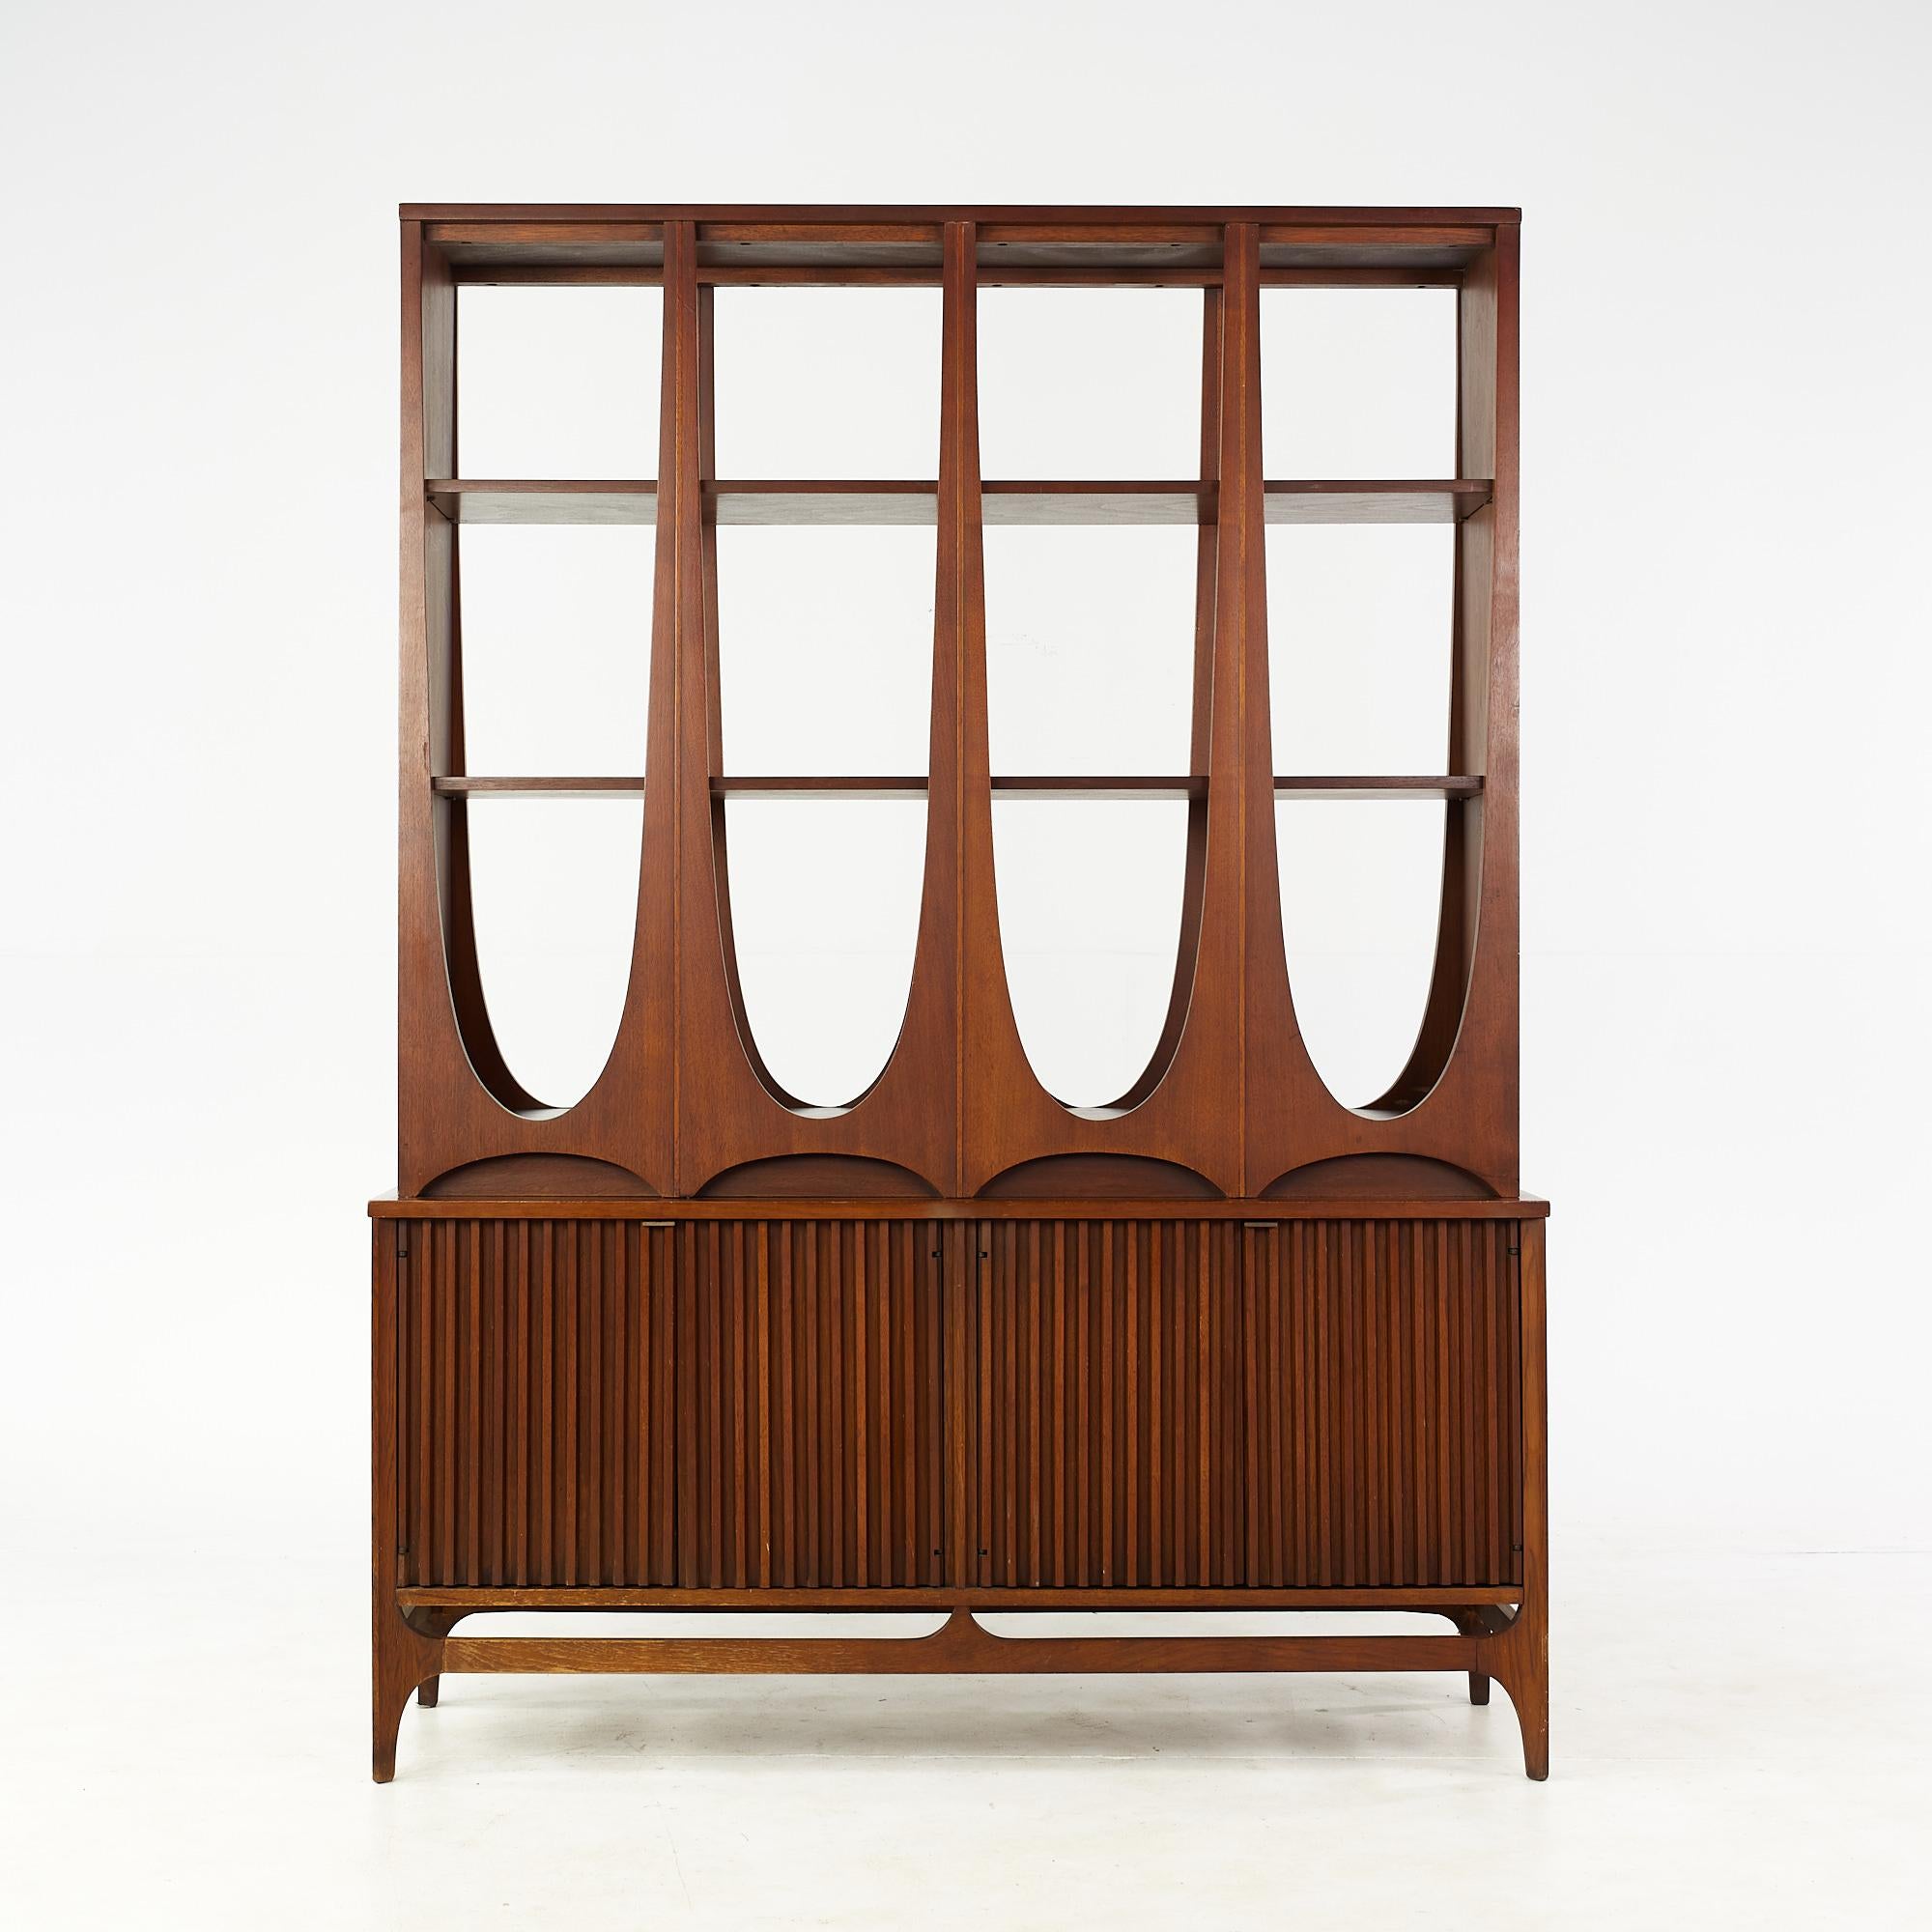 Broyhill Brasilia Mid Century Walnut Room Divider

The credenza bottom measures: 54 wide x 17 deep x 27 inches high
The top shelving measures: 52 wide x 13 deep x 46 inches high
The combined height of the room divider is 73 inches

All pieces of